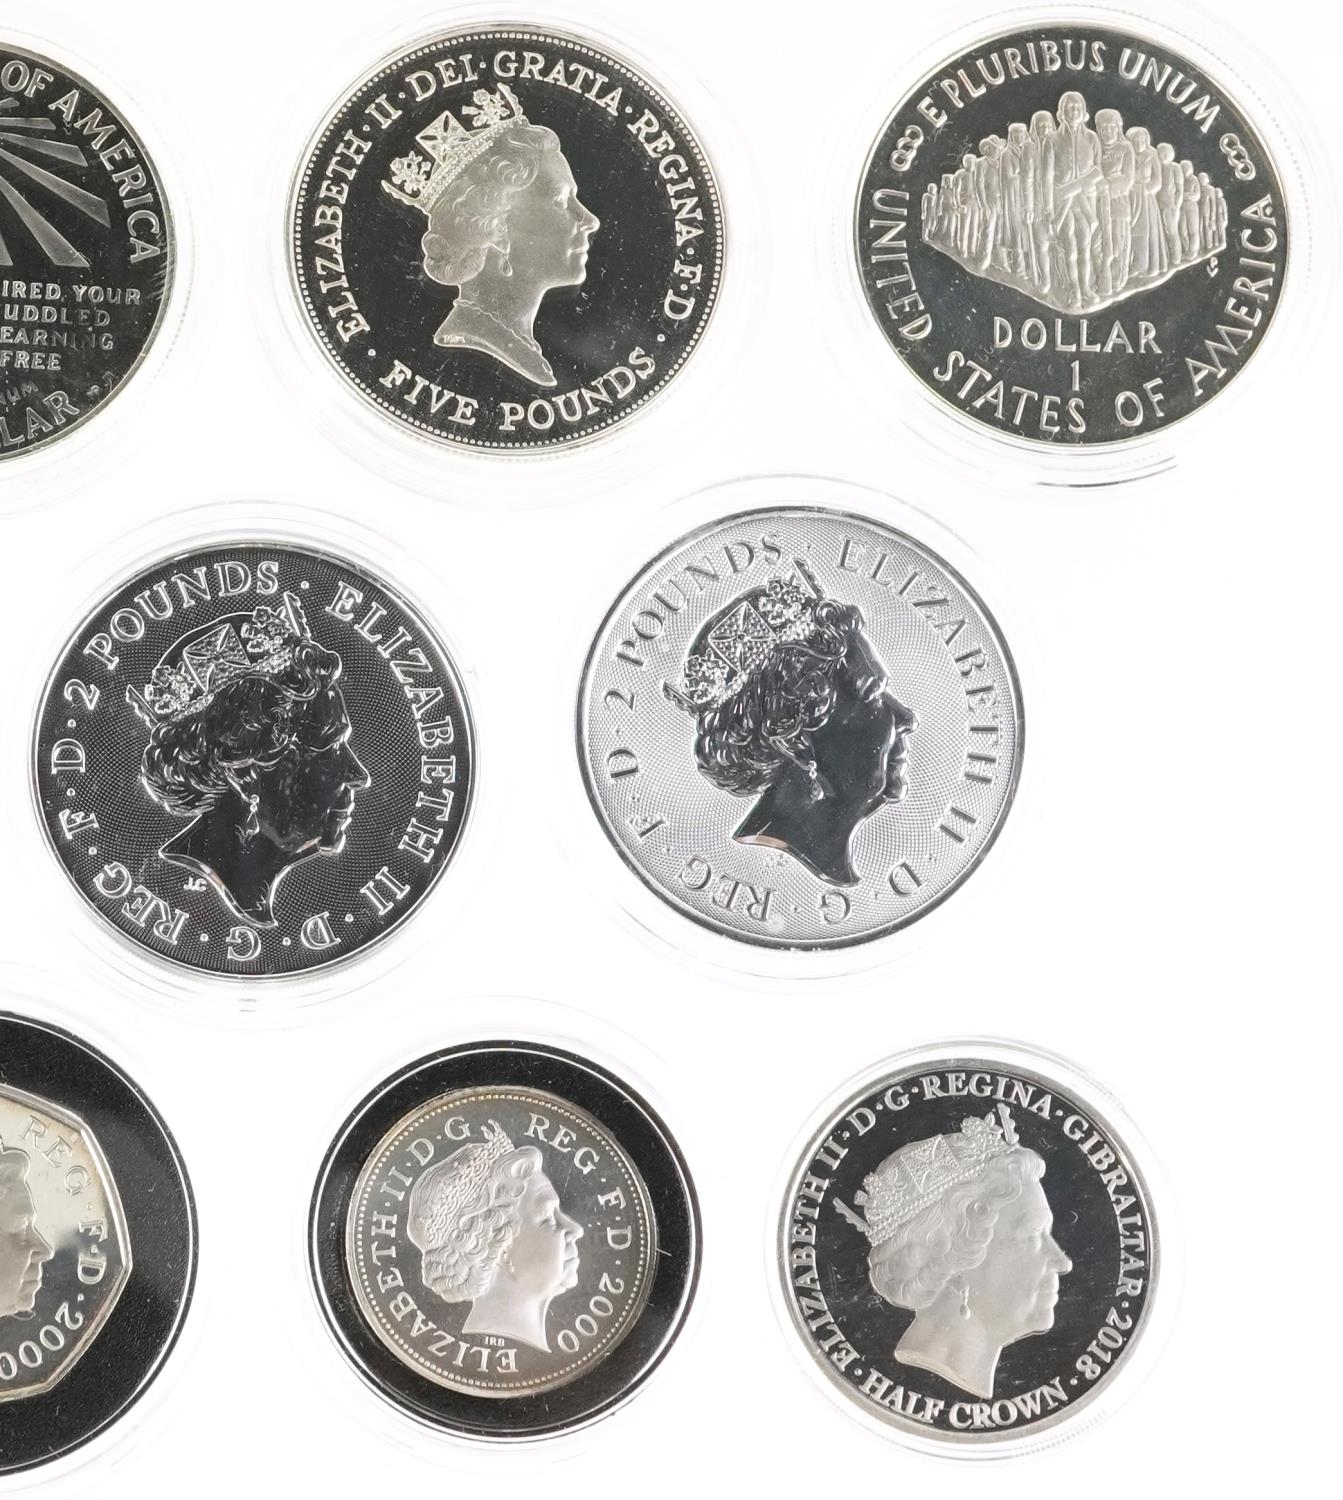 British and American coinage, some silver proof, including 2021 one ounce fine silver two pounds, - Image 6 of 6